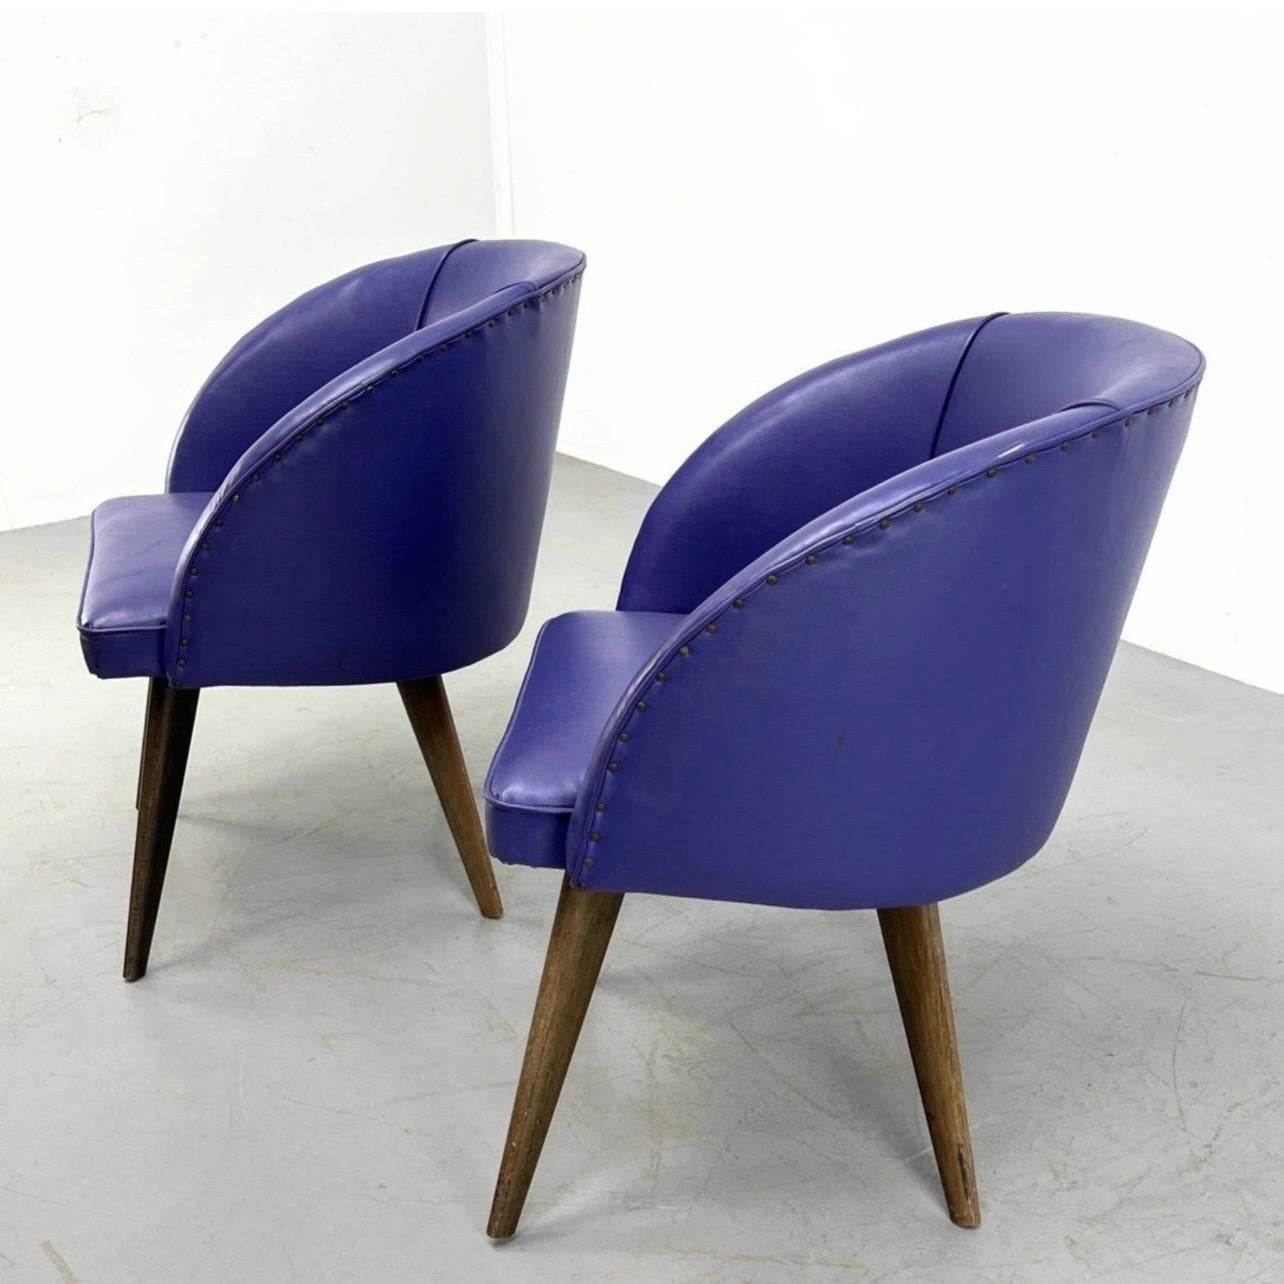 A fantastic pair of Danish Modern Purple Upholstered Barrel Tub Chairs.
Pair vintage vinyl purple barrel chairs. Studded around back. Tapered Angular legs. Dimensions: H: 29.5 inches: W: 25.5 inches: D: 22.5 inches - Seat Height: 17 inches -.